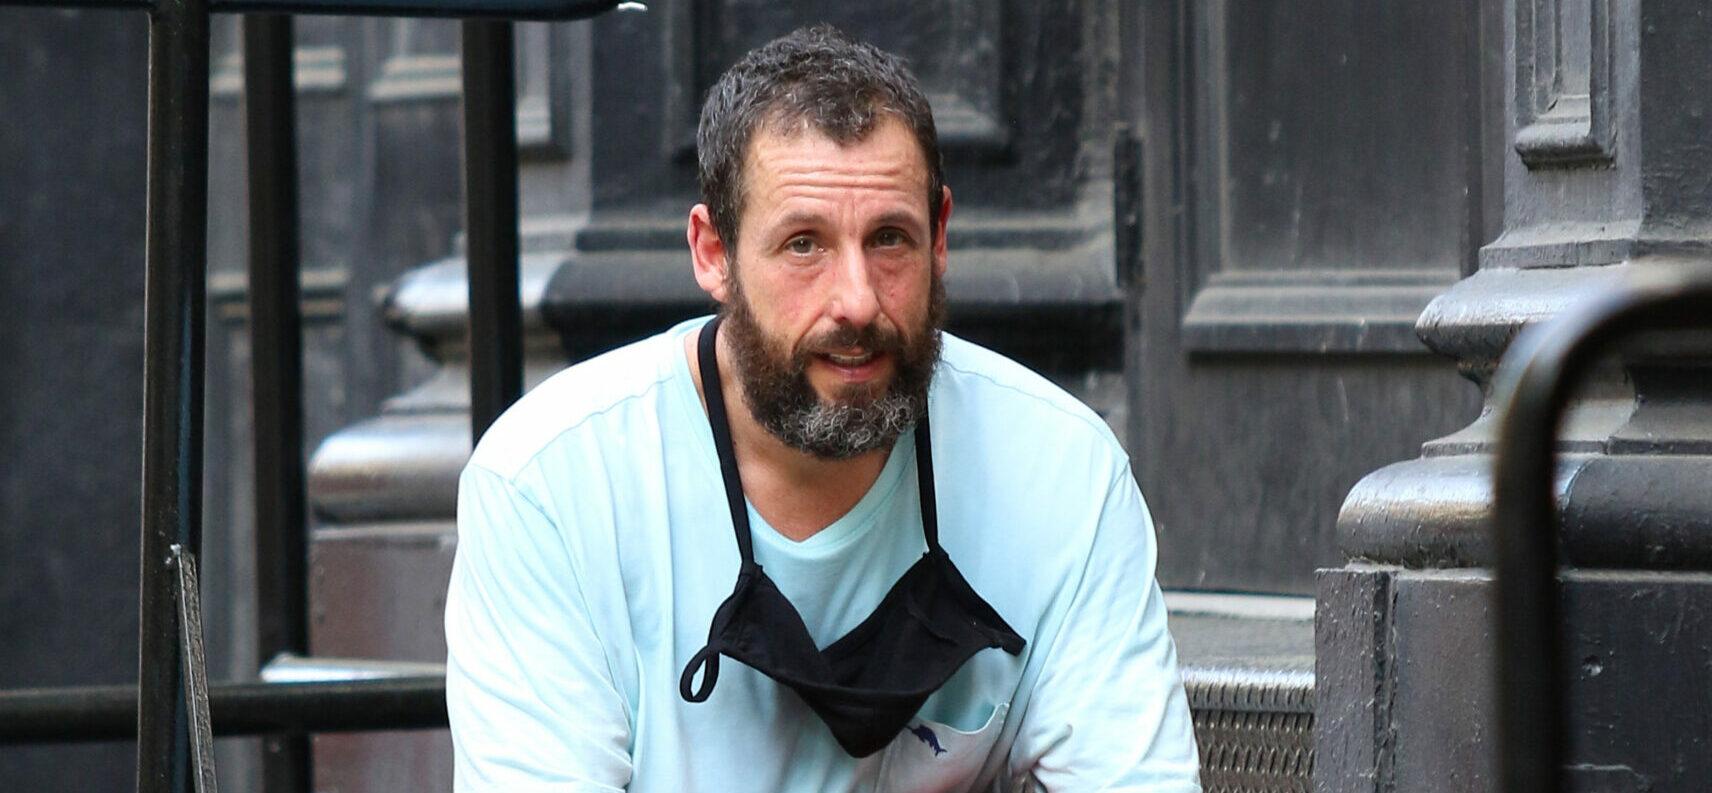 Adam Sandler holds a basketball and sits down to rest after a game in NYC